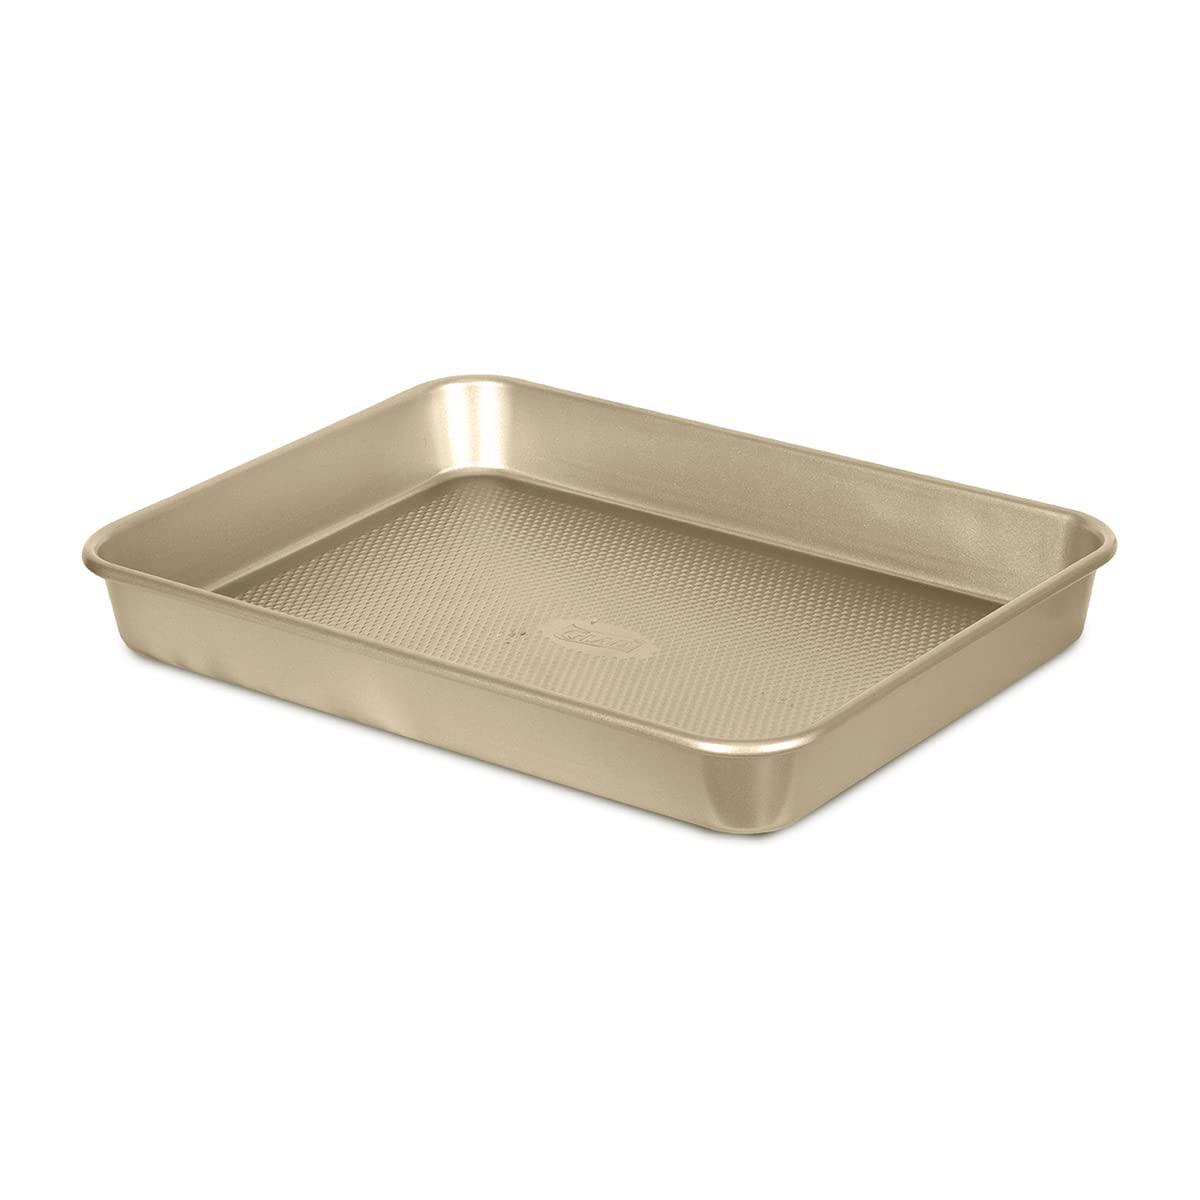 Glad Baking Pan Nonstick - Oblong Metal Dish for Cake and Lasagna - Heavy Duty Carbon Steel Bakeware, Medium - CookCave